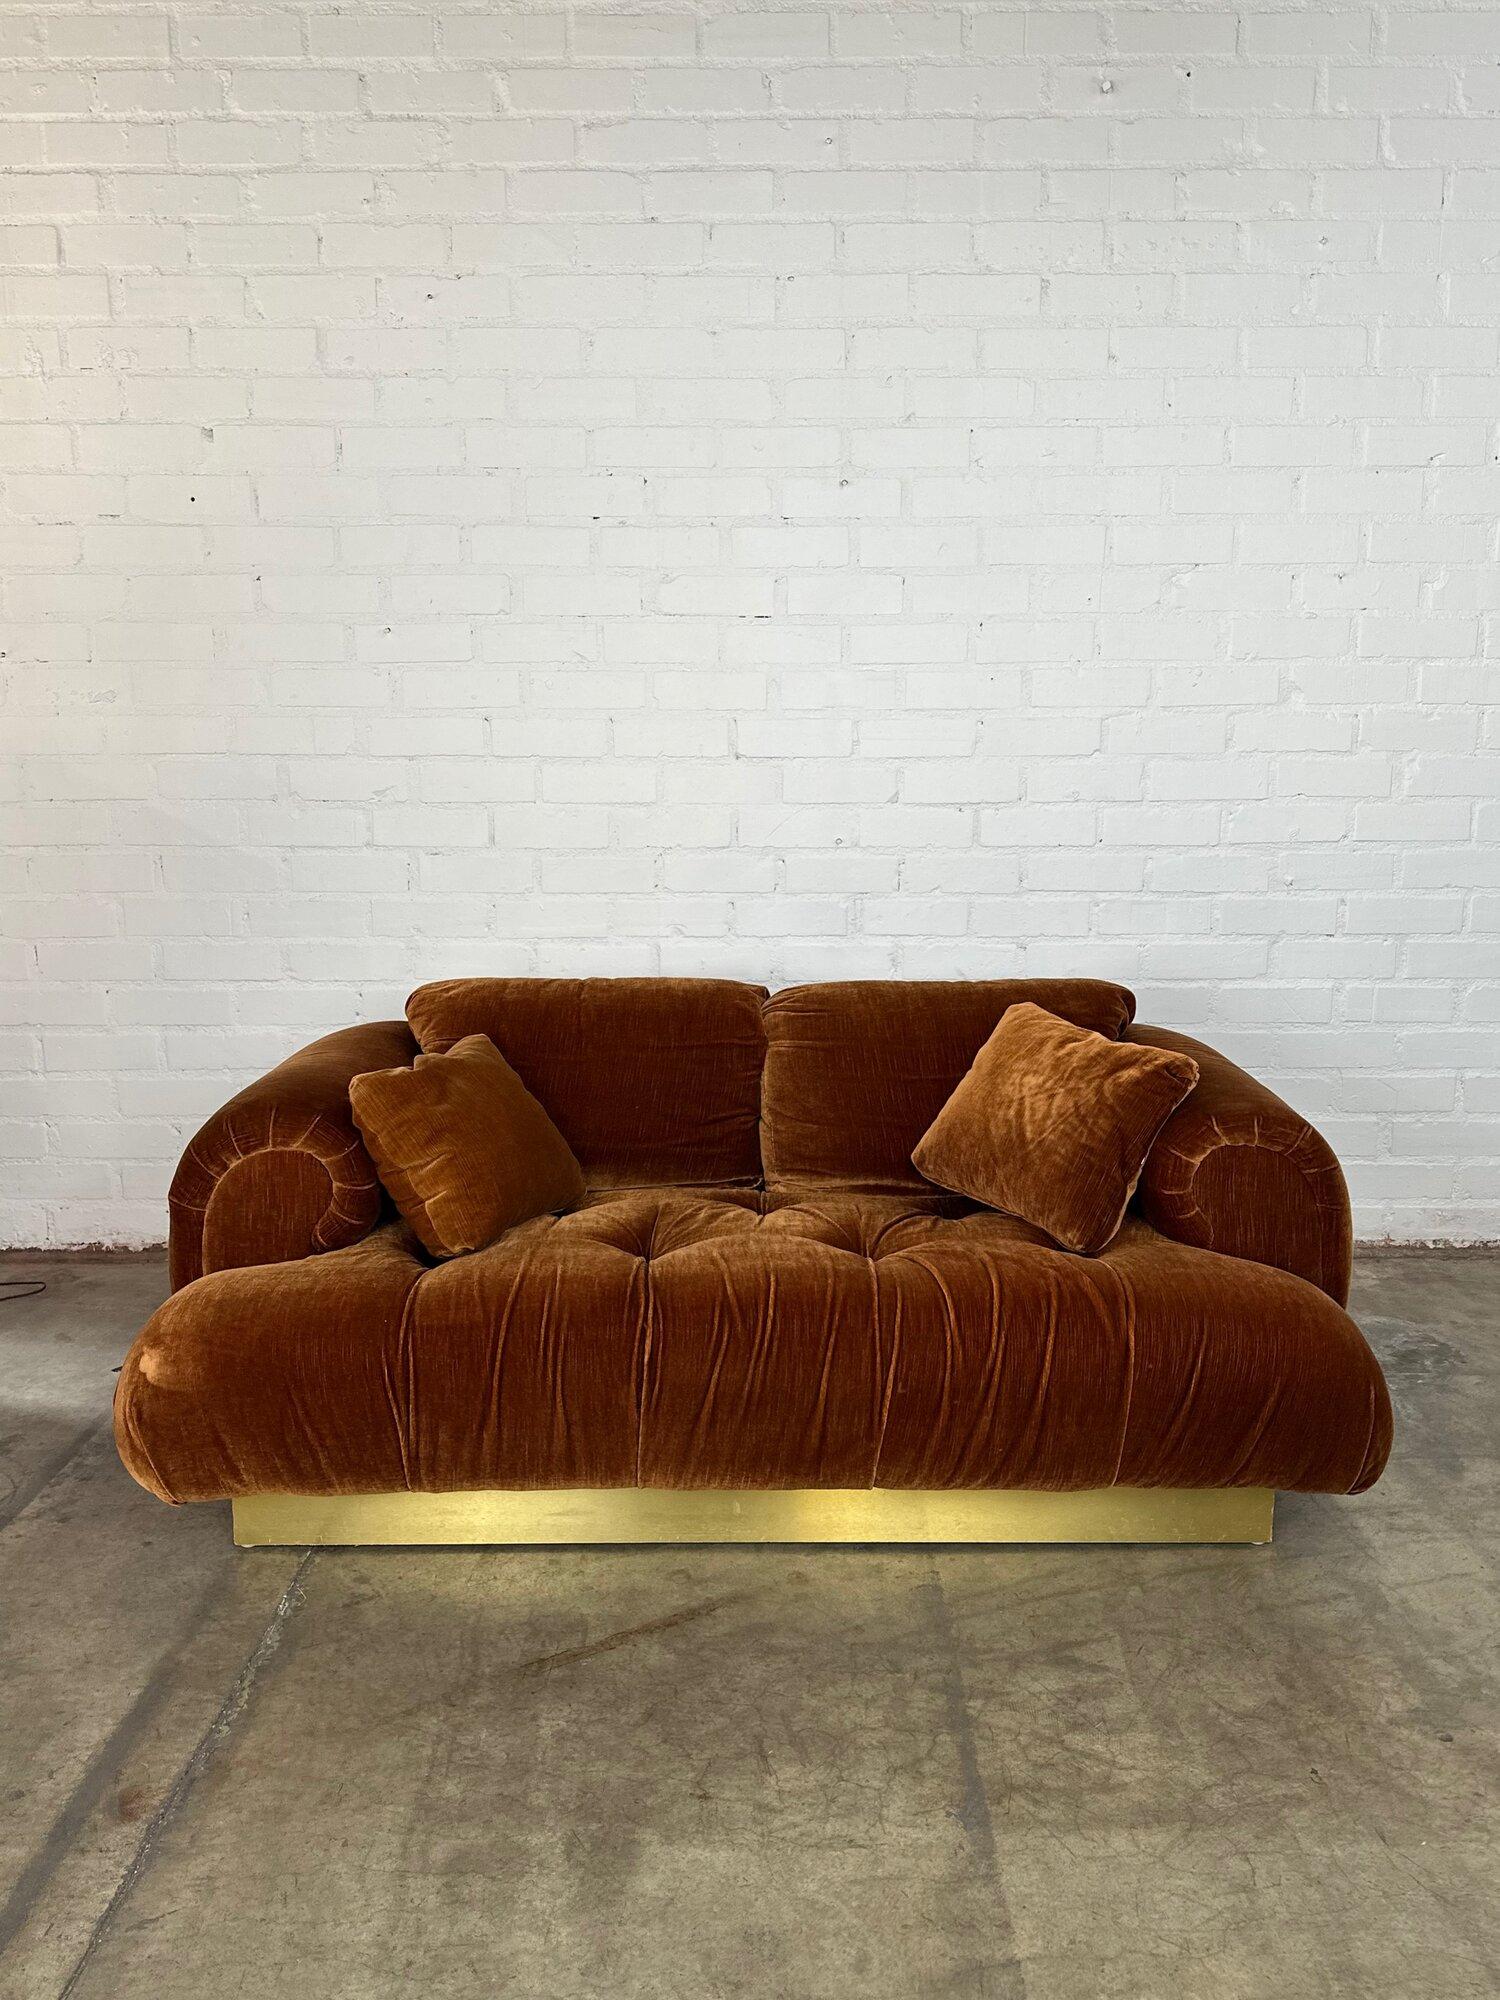 W70 D40 H29 SW60 SD27 SH15

Vintage velvet and brass overstuffed sofa on a plinth base. Plinth is brass covered on all sides except the backside. Original fabric is in great condition with no major areas of damage and no visible rips. Sofa is